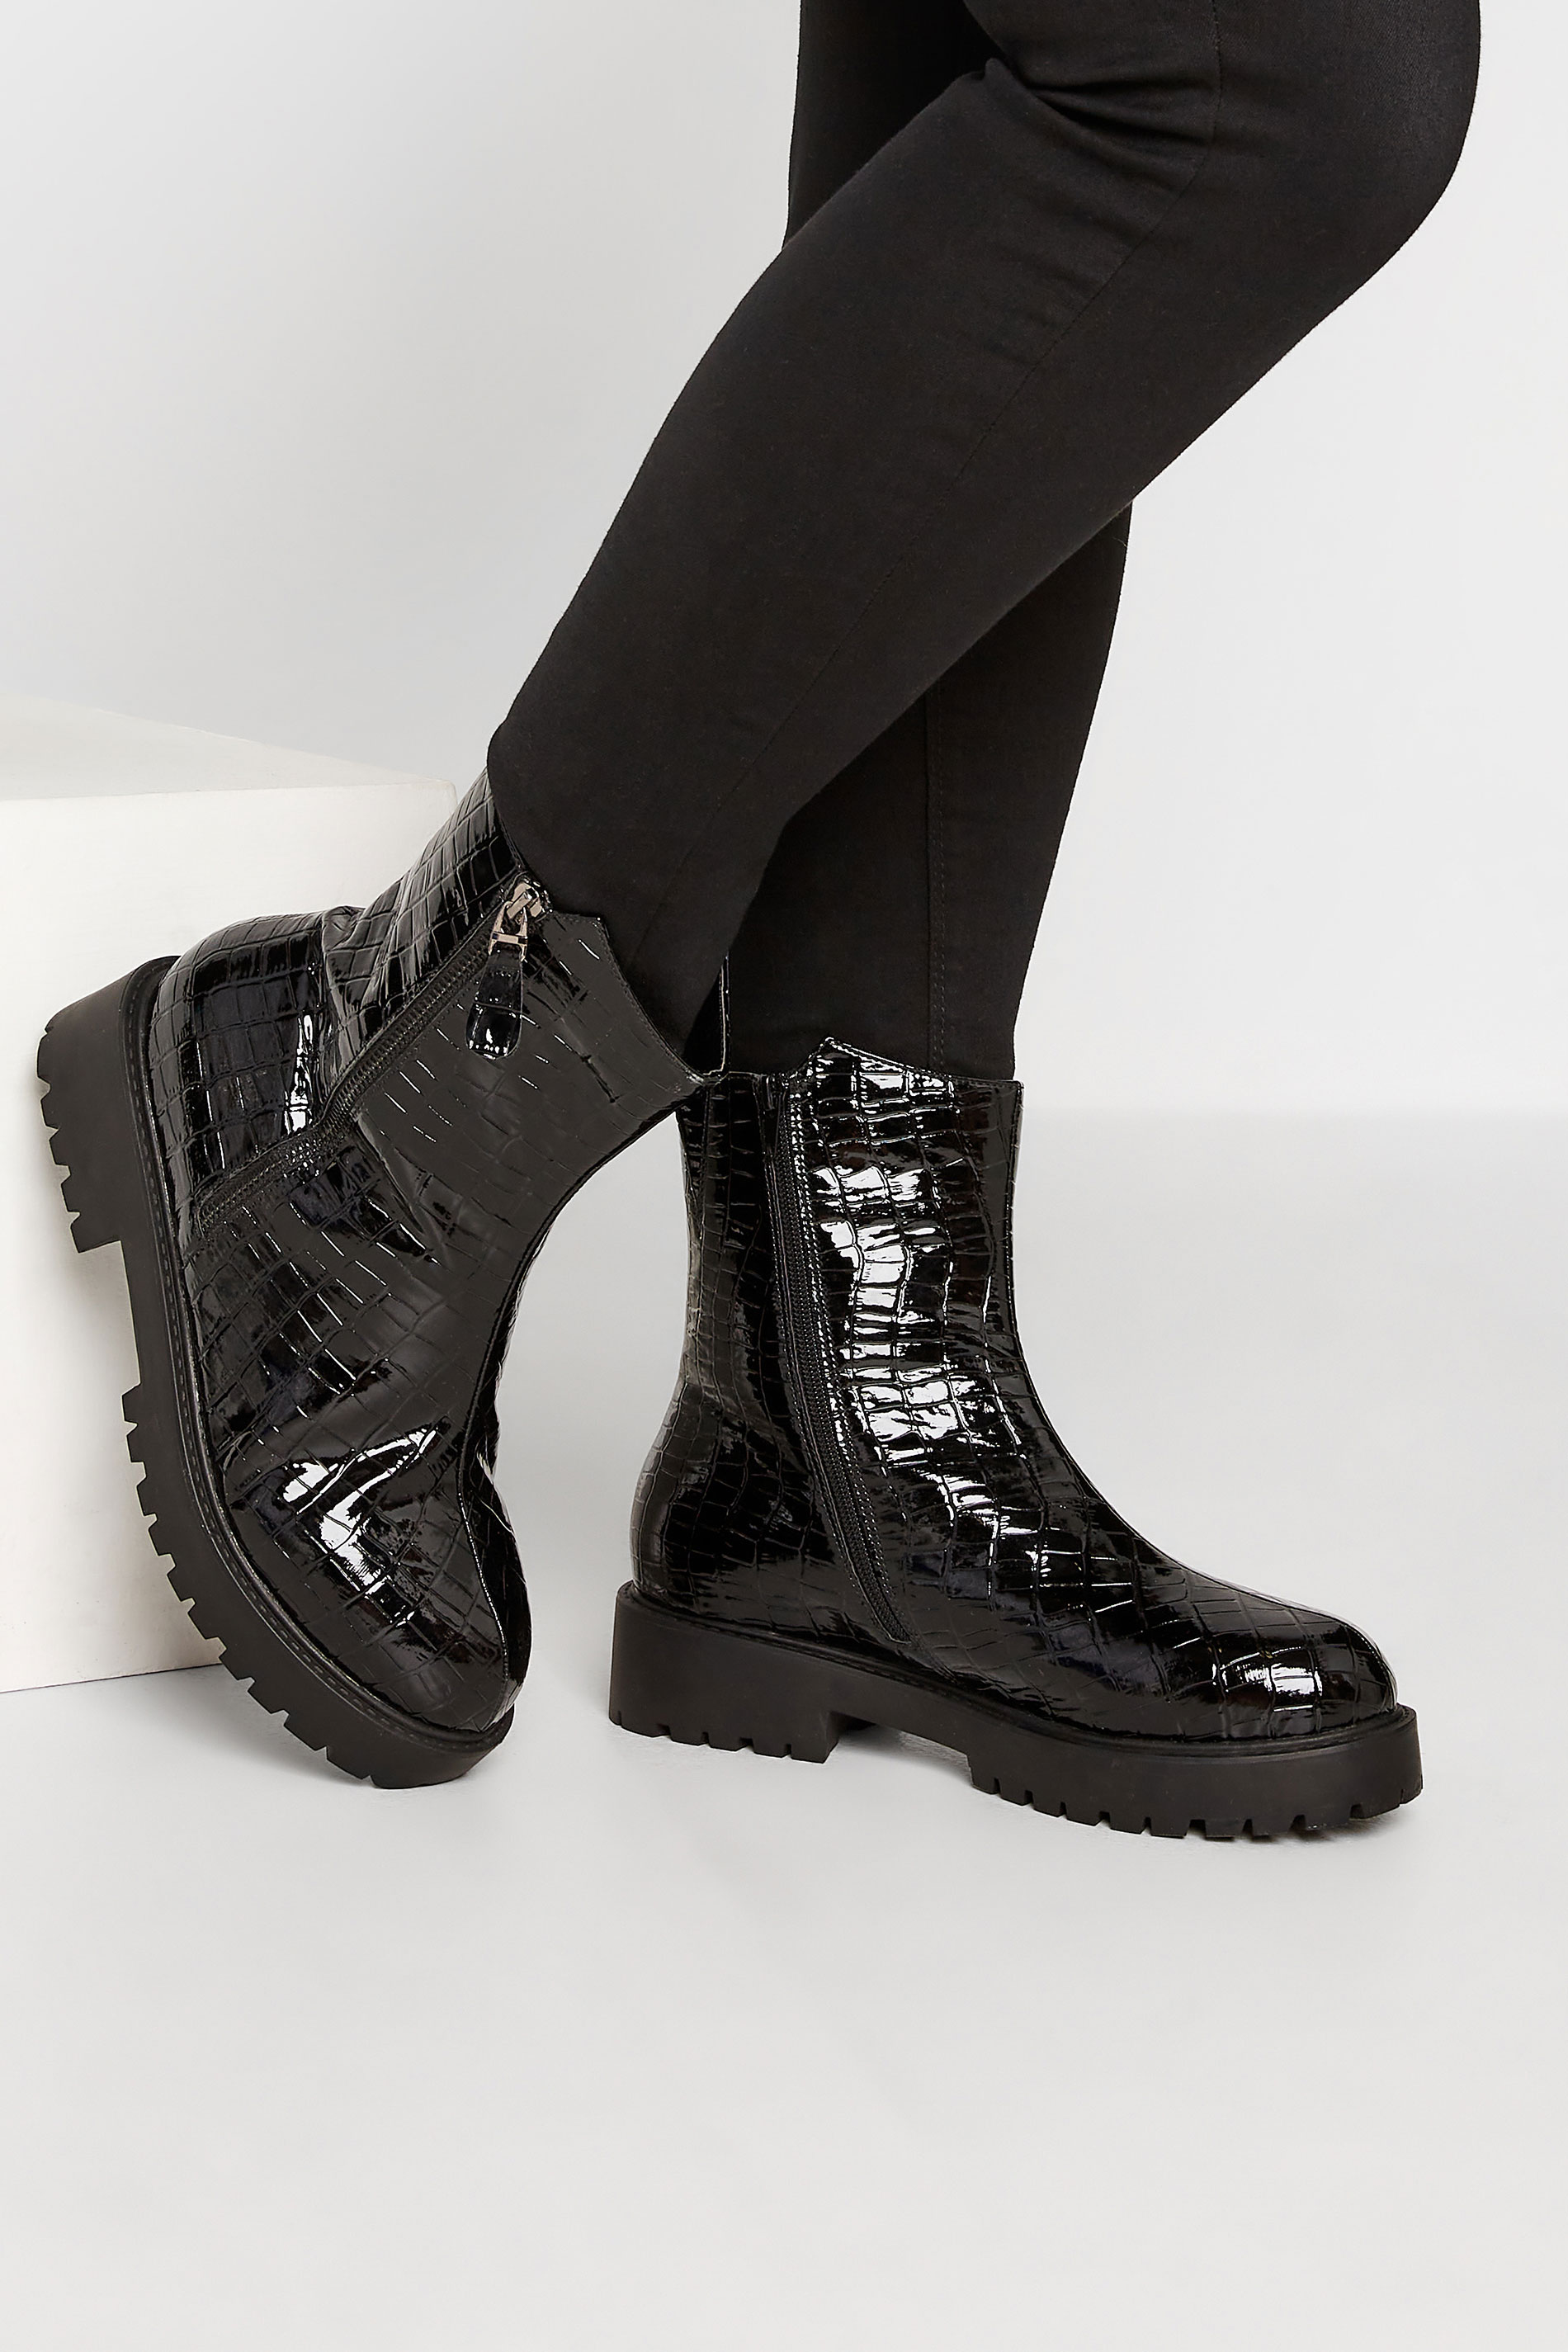 Black Croc Patent Side Zip Boots In Extra Wide EEE Fit | Yours Clothing 1